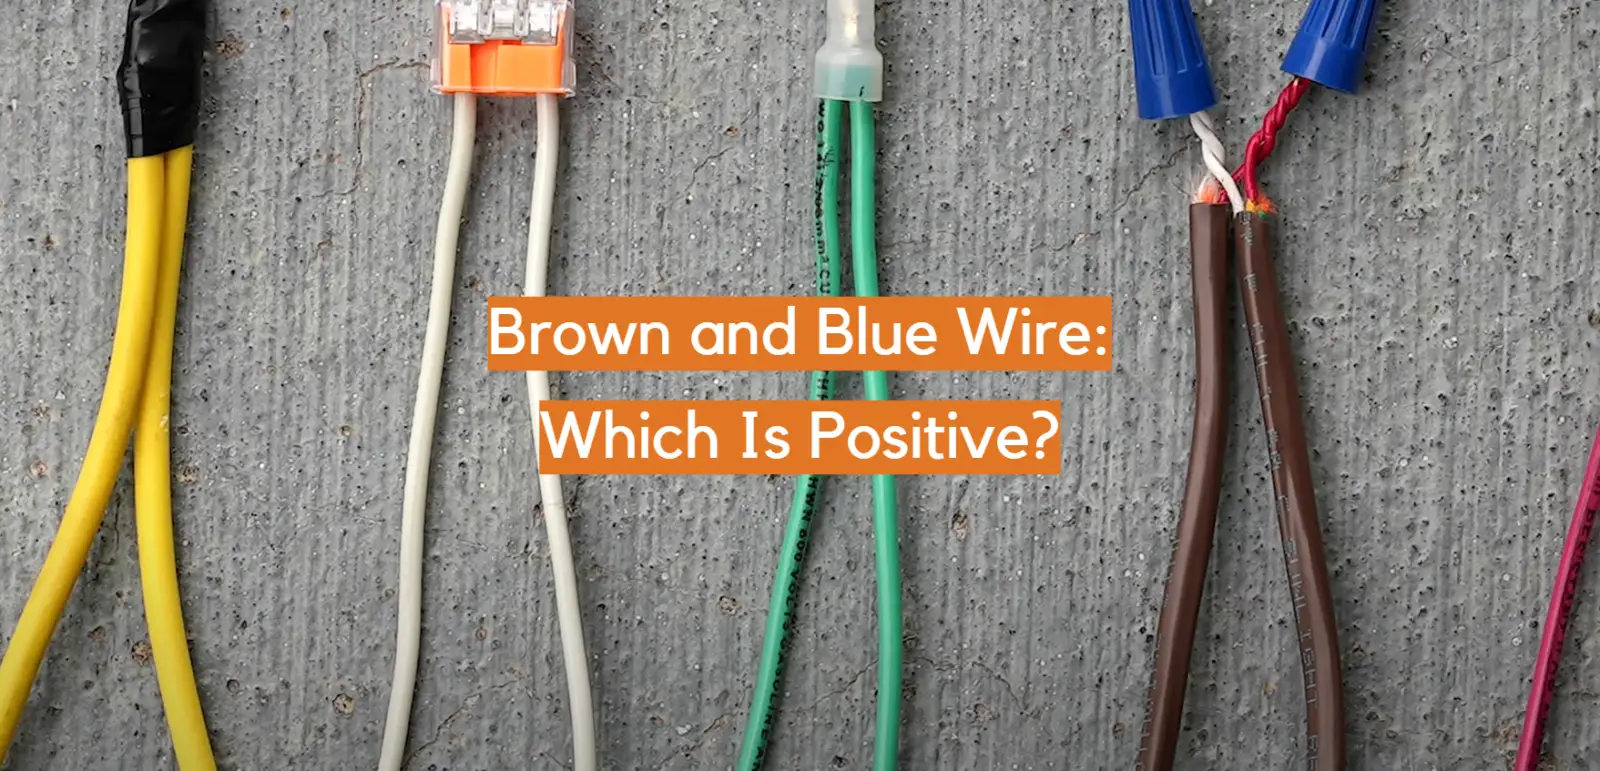 Brown and Blue Wire: Which Is Positive?